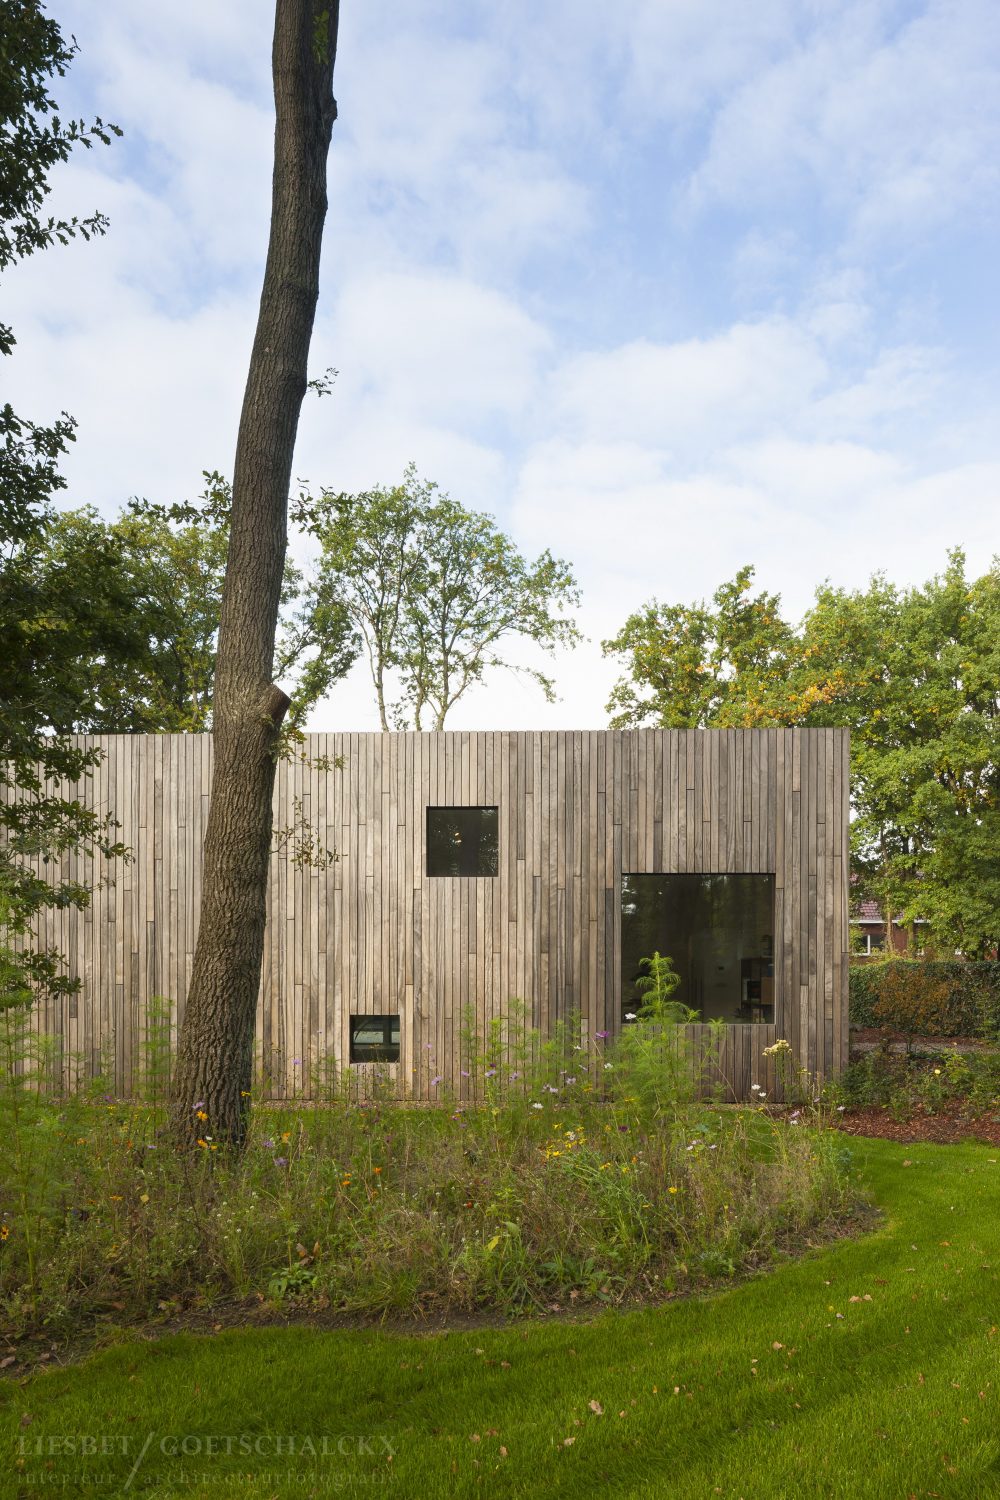 Square House by Cocoon Architecten